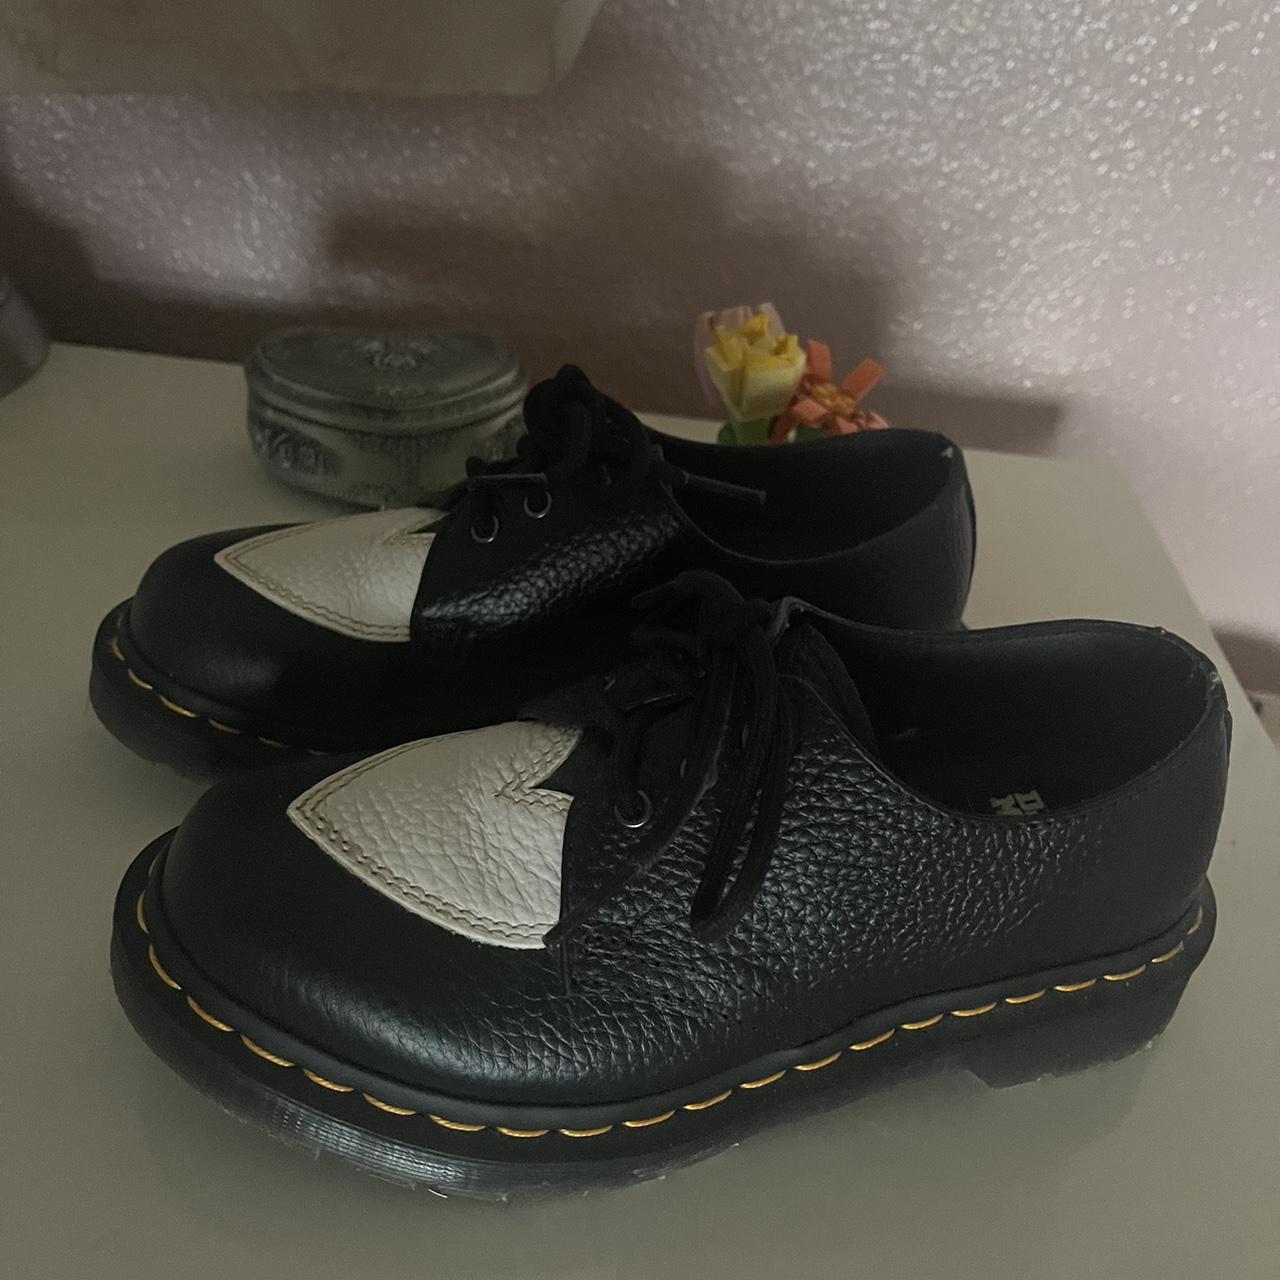 Dr. Martens Women's Black and White Brogues (2)